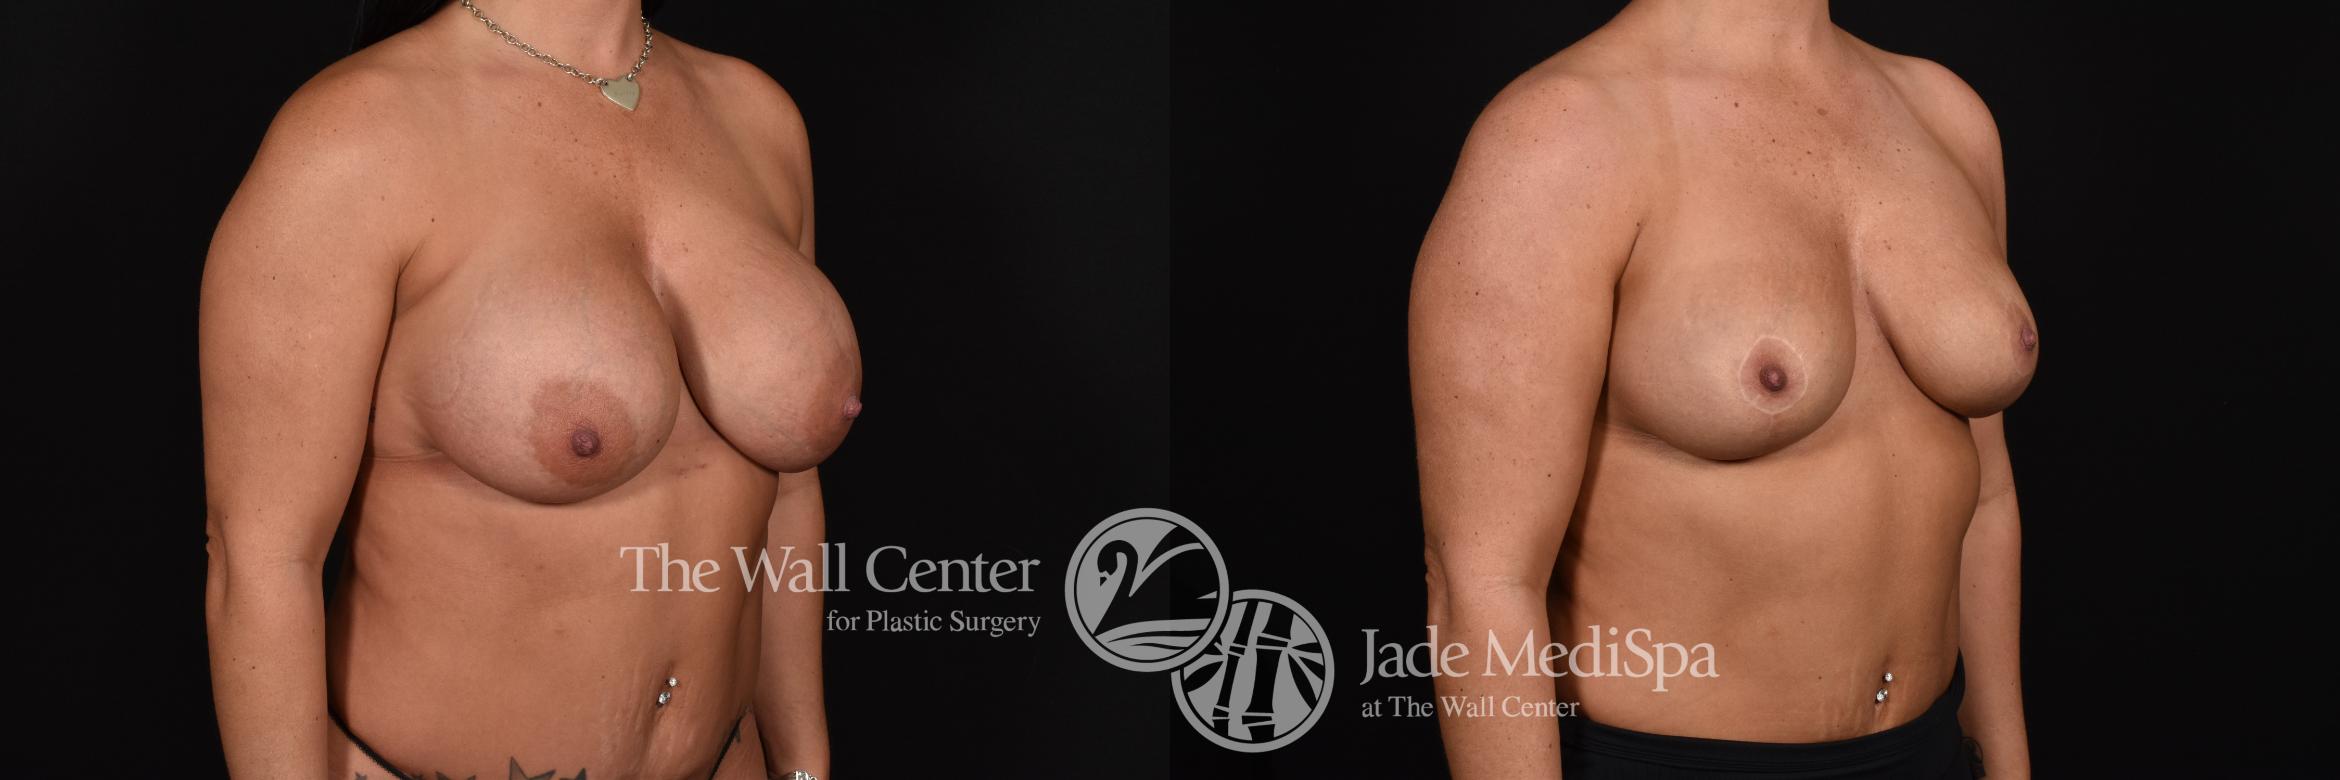 Breast Implant Exchange with Lift & SAFELipo Right Oblique Photo, Shreveport, Louisiana, The Wall Center for Plastic Surgery, Case 869